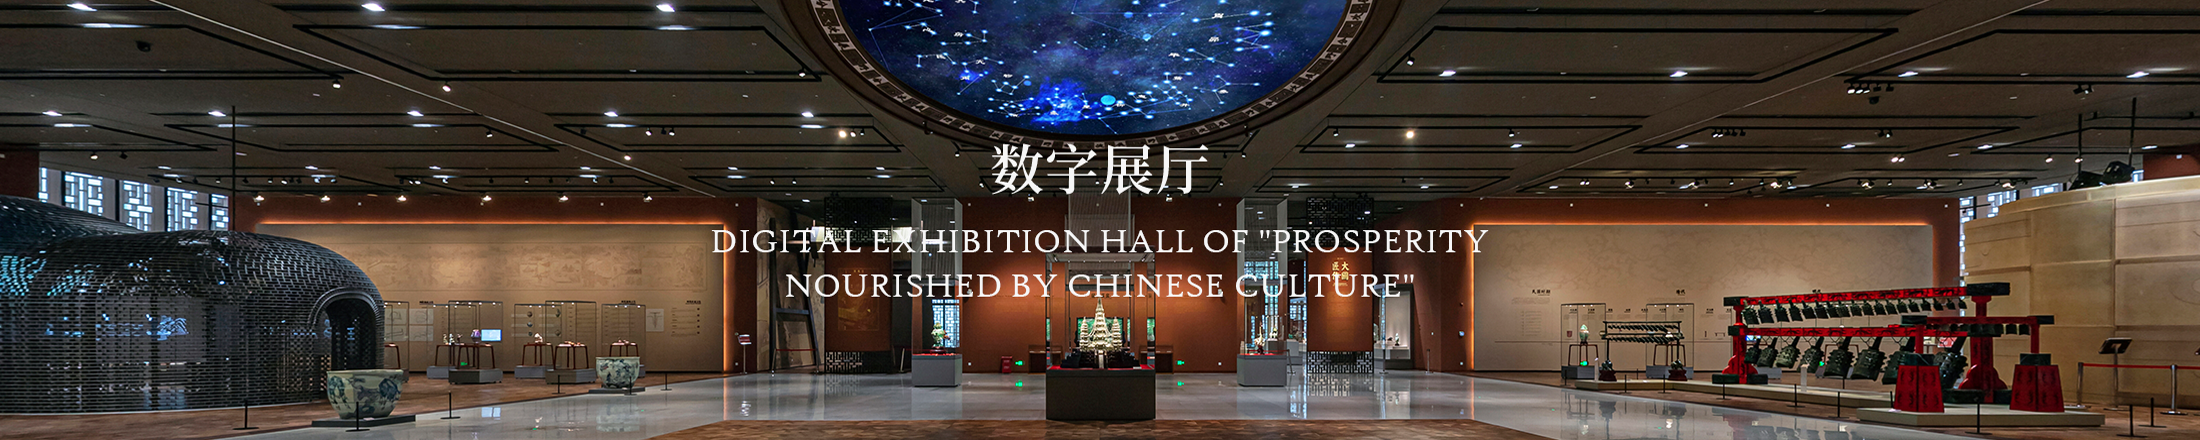 Digital Exhibition Hall of 'Prosperity Nourished by Chinese Culture' Basic Exhibition of Chinese Arts and Crafts